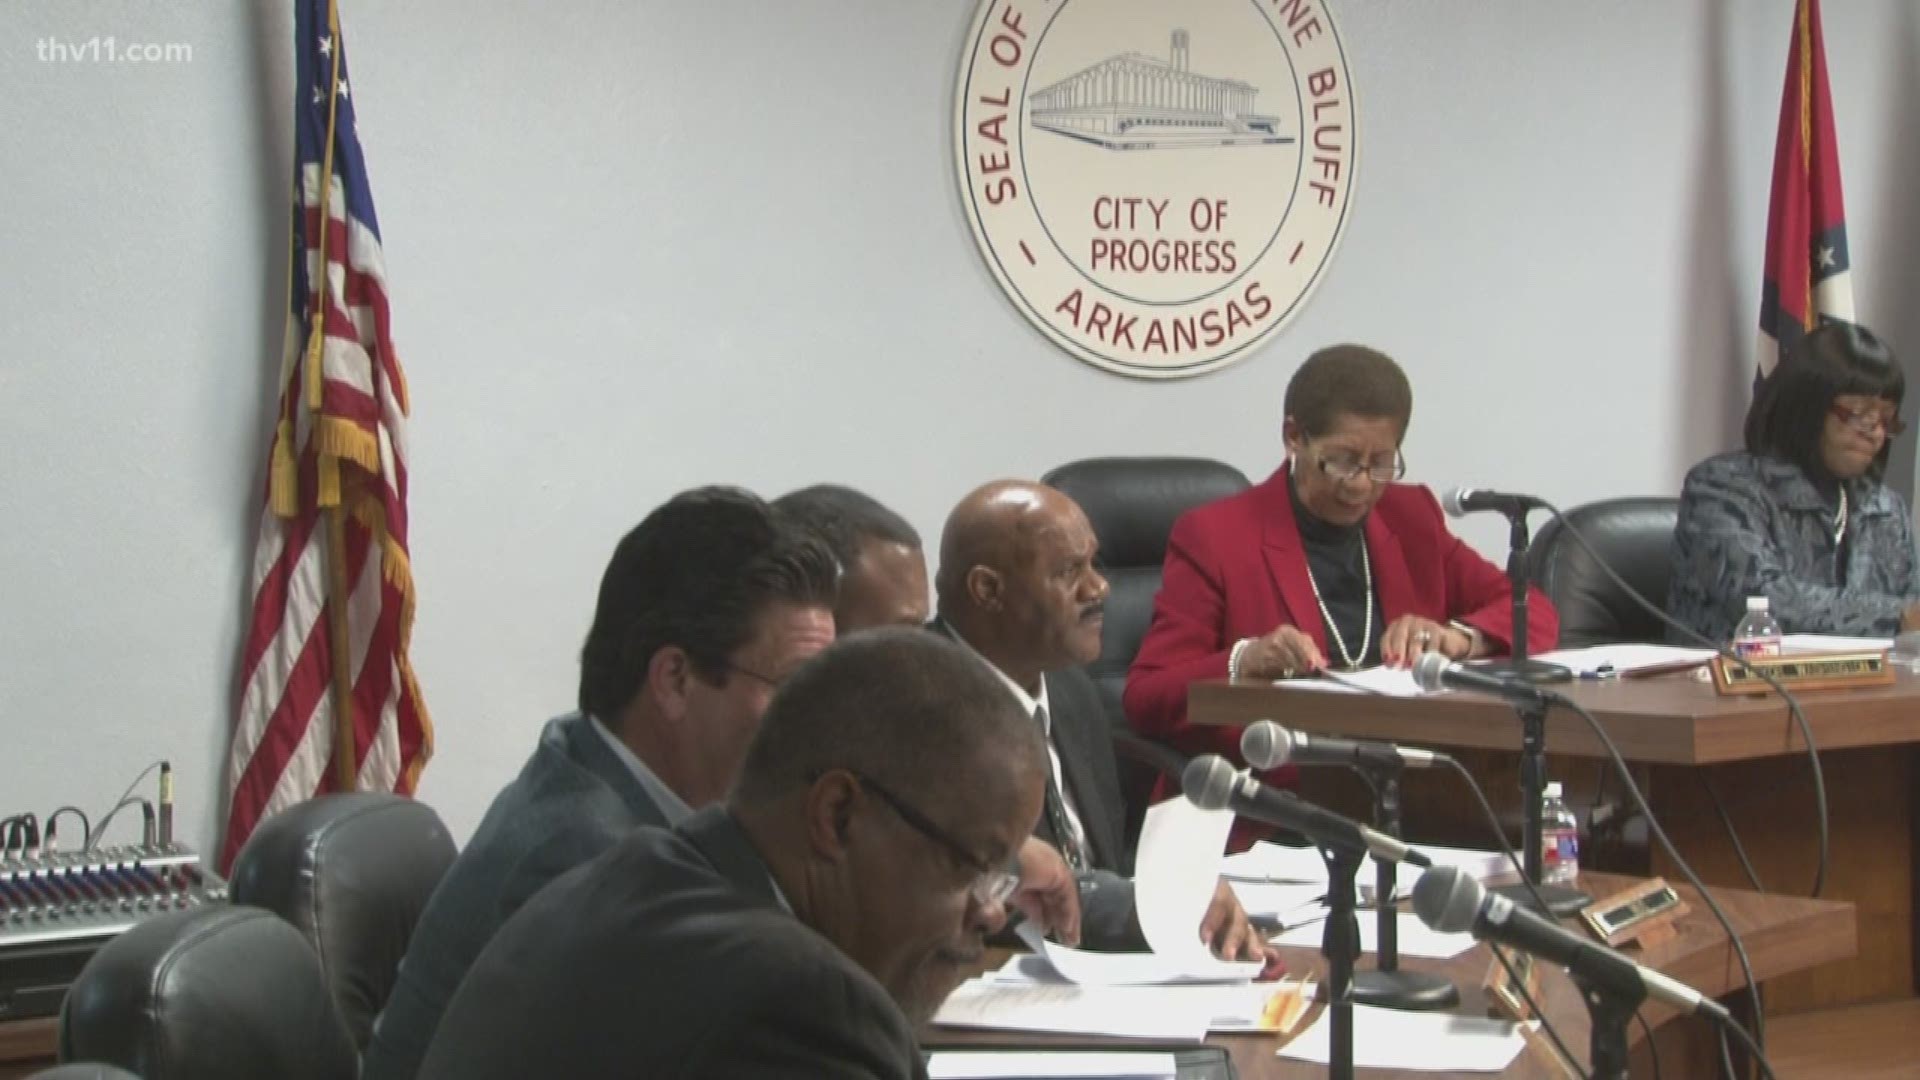 A controversial plan to protect illegal immigrants in Pine Bluff is off the table – for now.